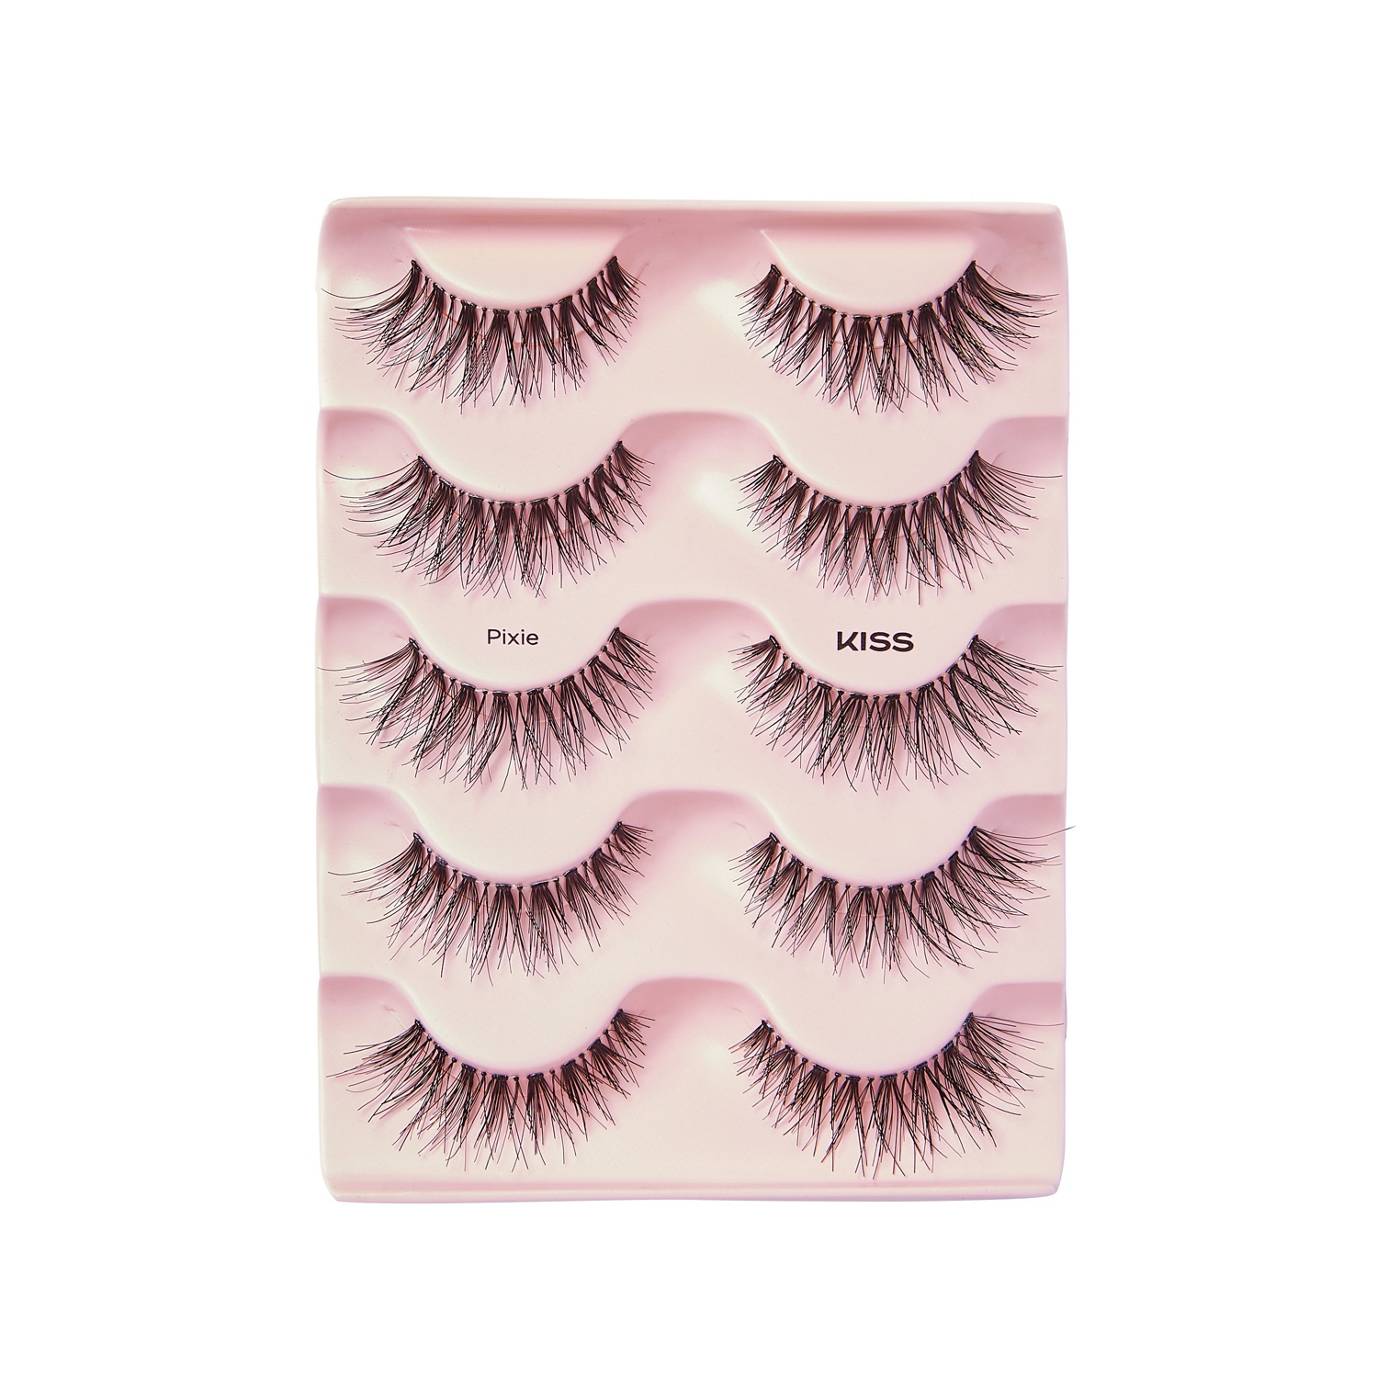 KISS Blowout Lashes - Pixie; image 4 of 5